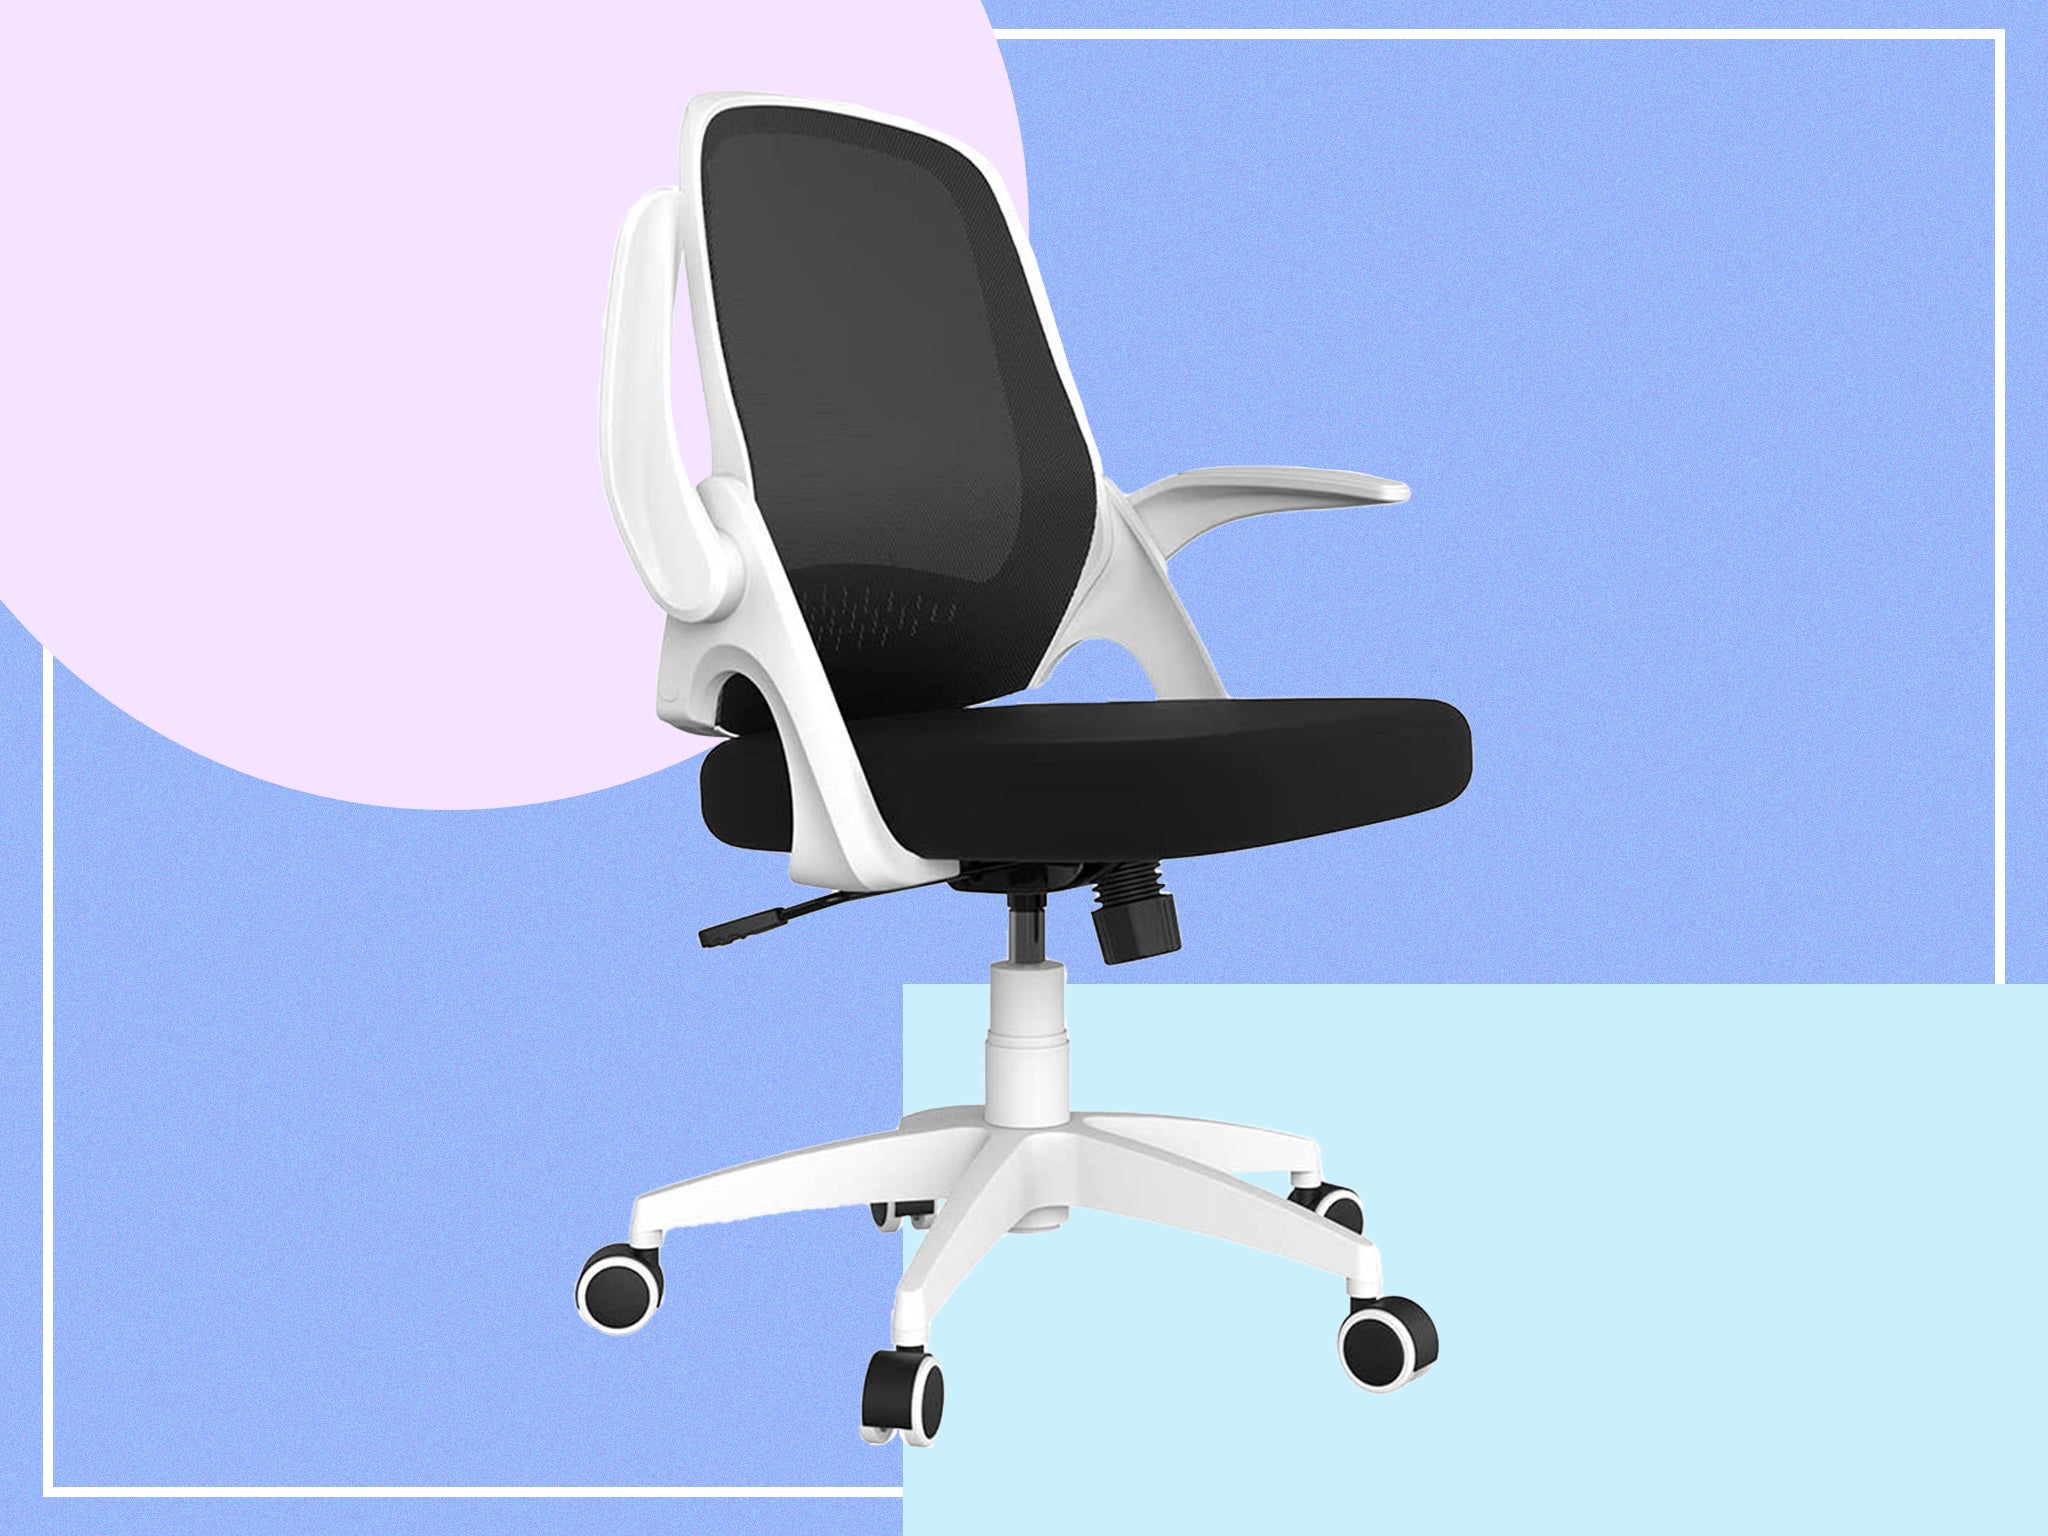 Hbada office chair review: A budget-friendly companion for working